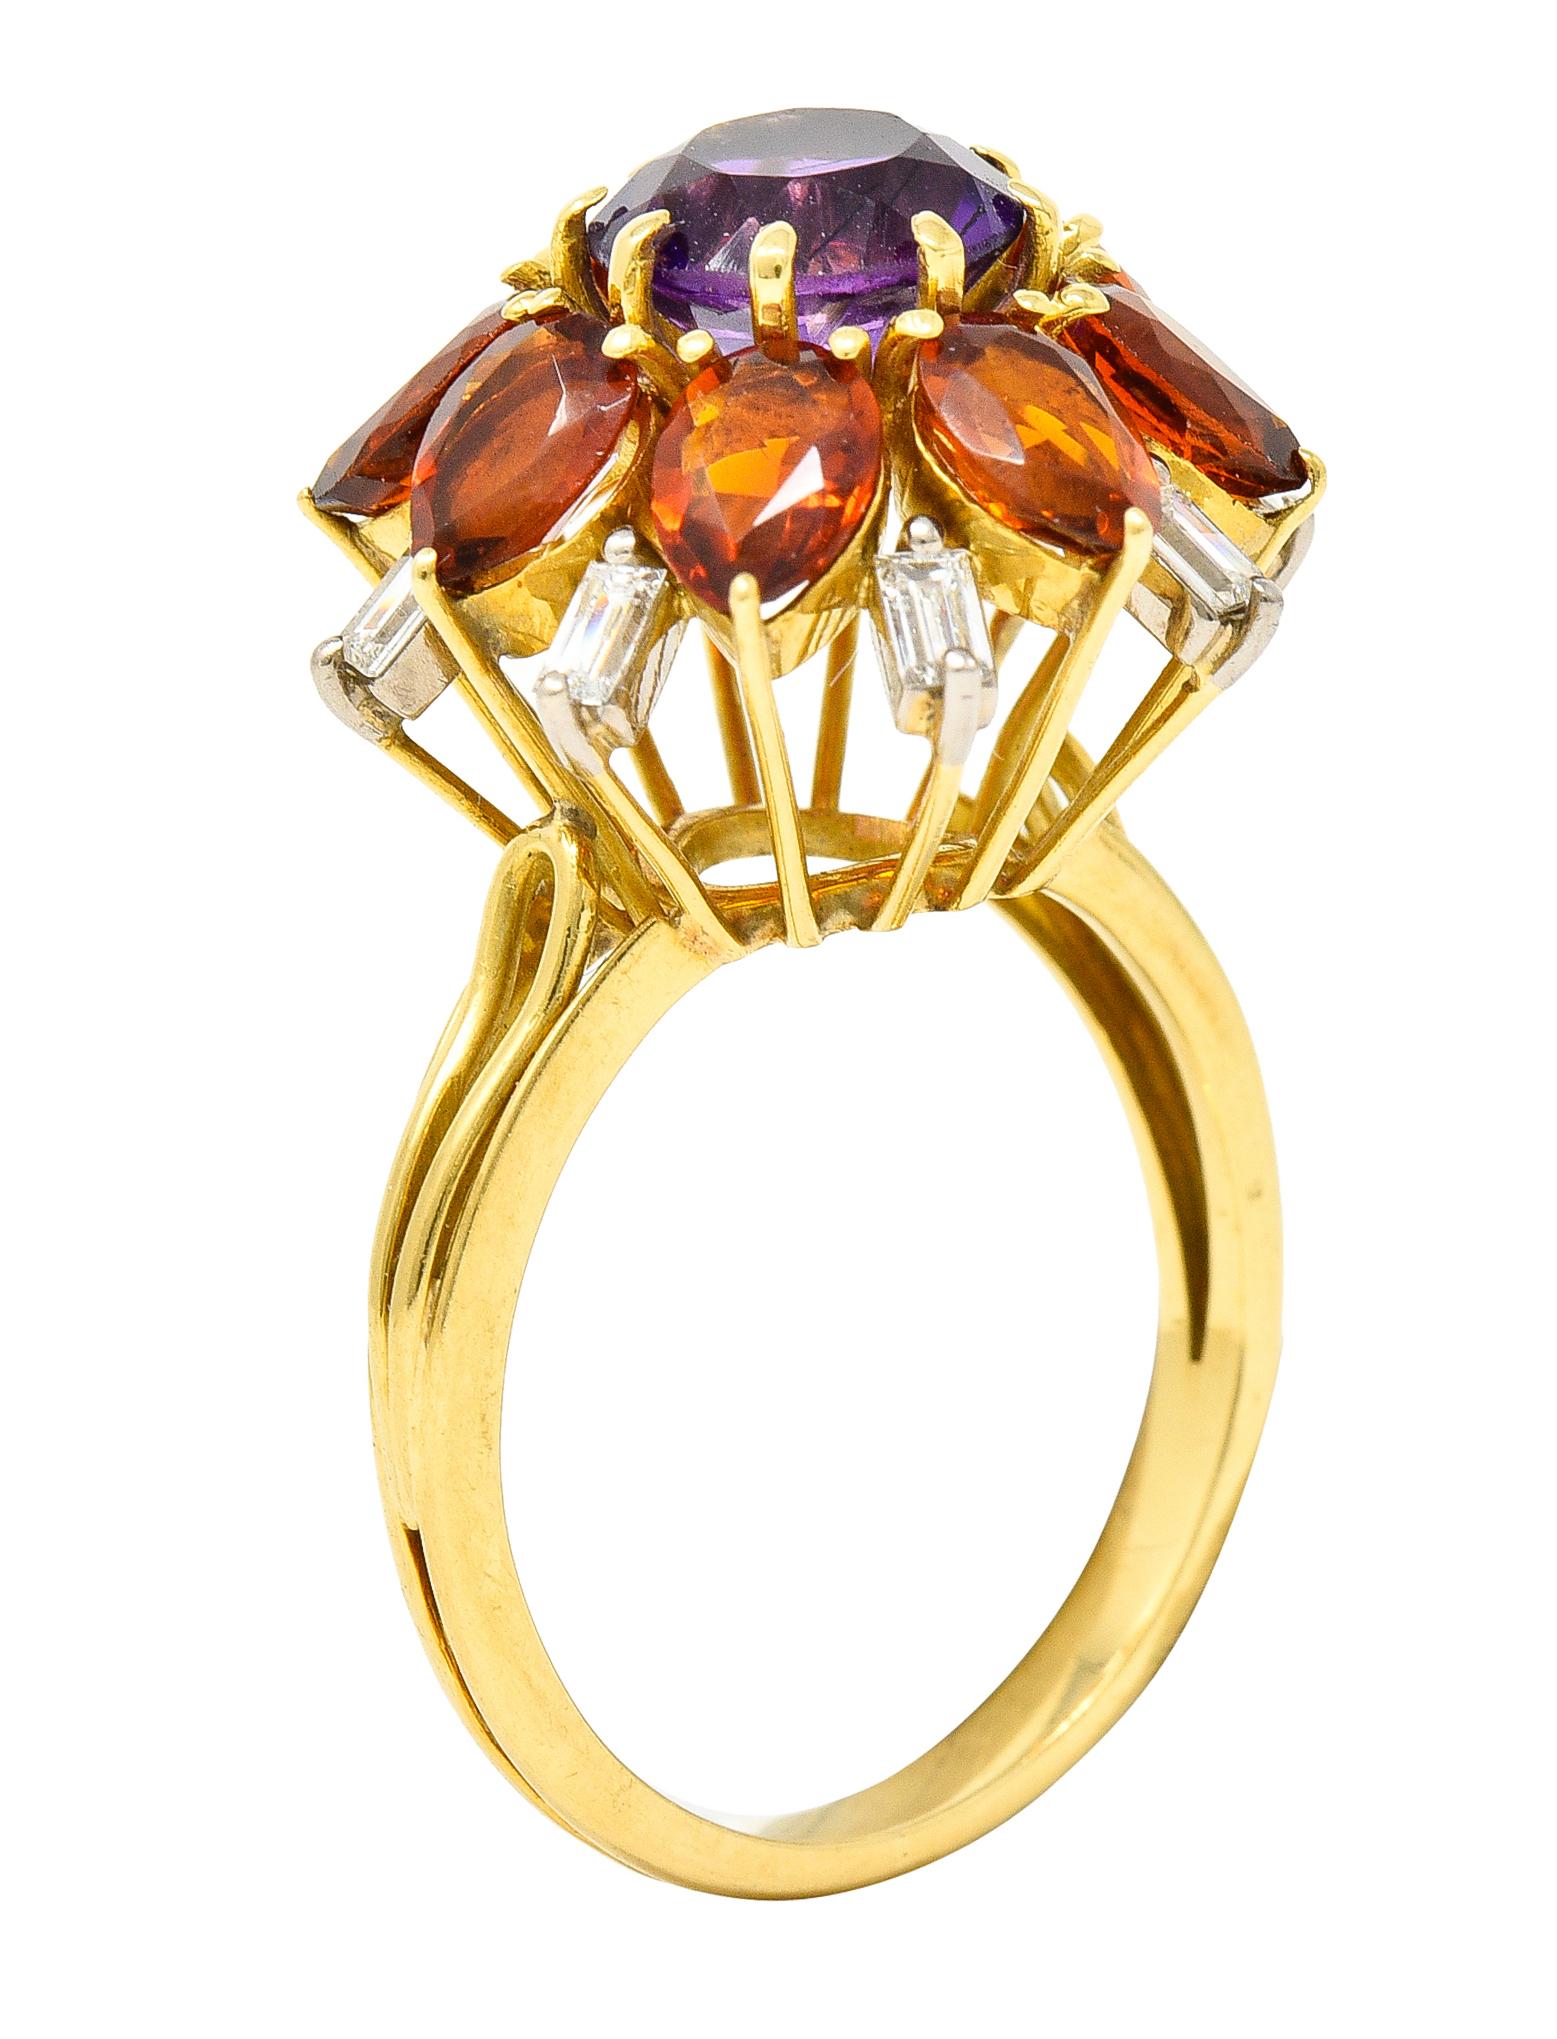 Centering a prong set round cut amethyst weighing approximately 1.70 carats total. Transparent medium purple in color - with a citrine cluster surround. Pear cut and weighing approximately 4.00 carats total. Transparent medium brownish-orange -